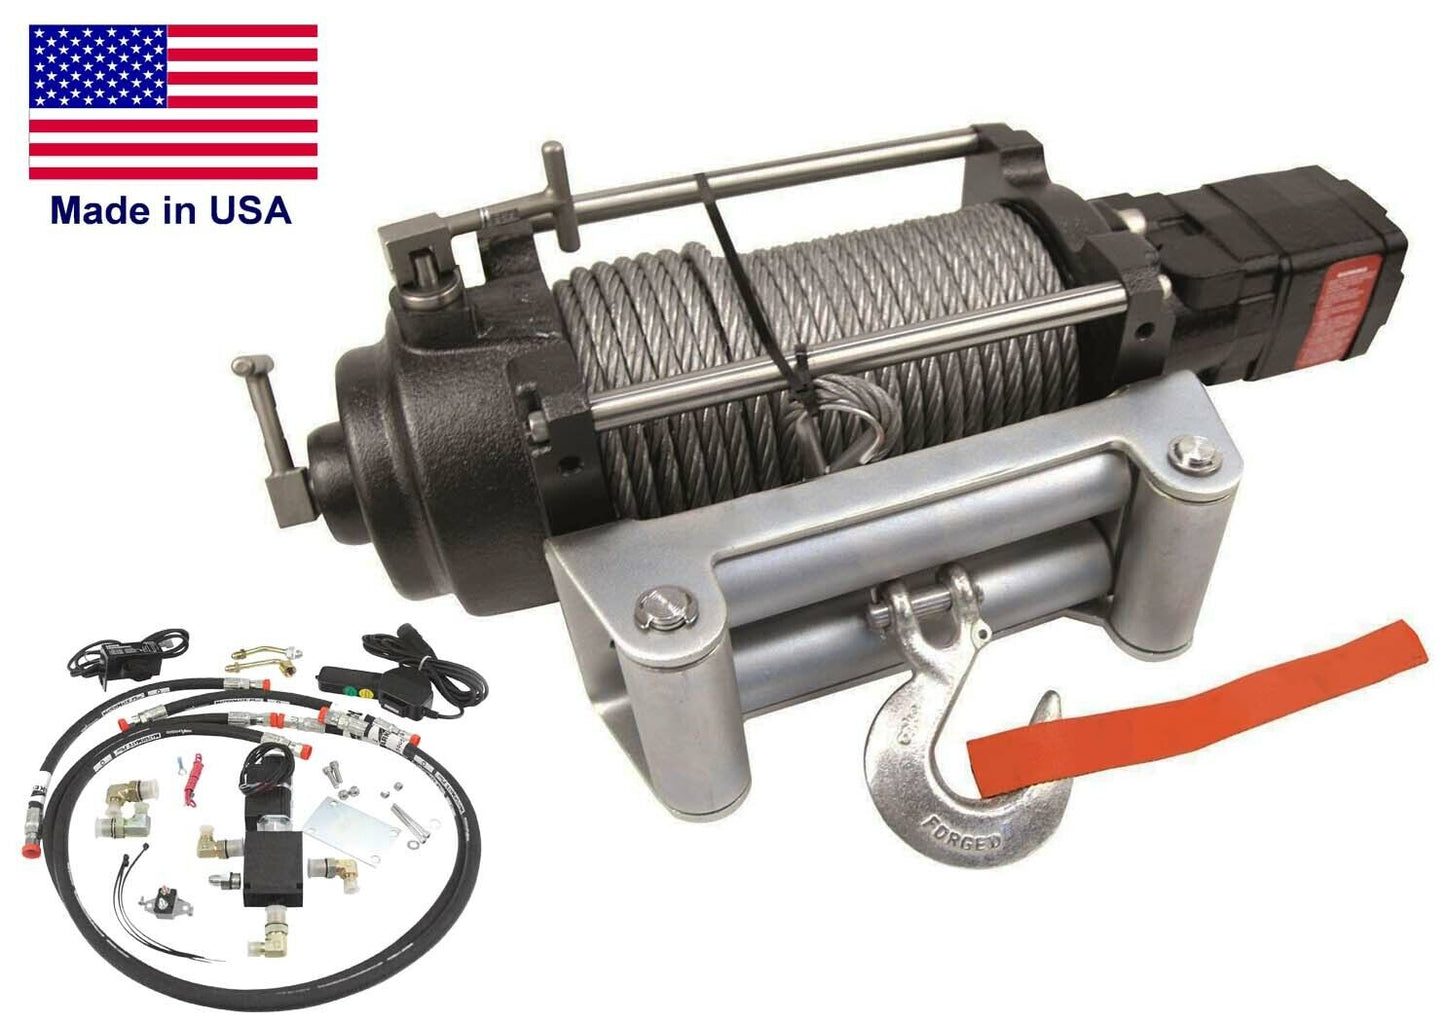 Hydraulic Winch for Chevy 1988 to 1998- 12,000 lbs Cap - Waterproof - Reversible